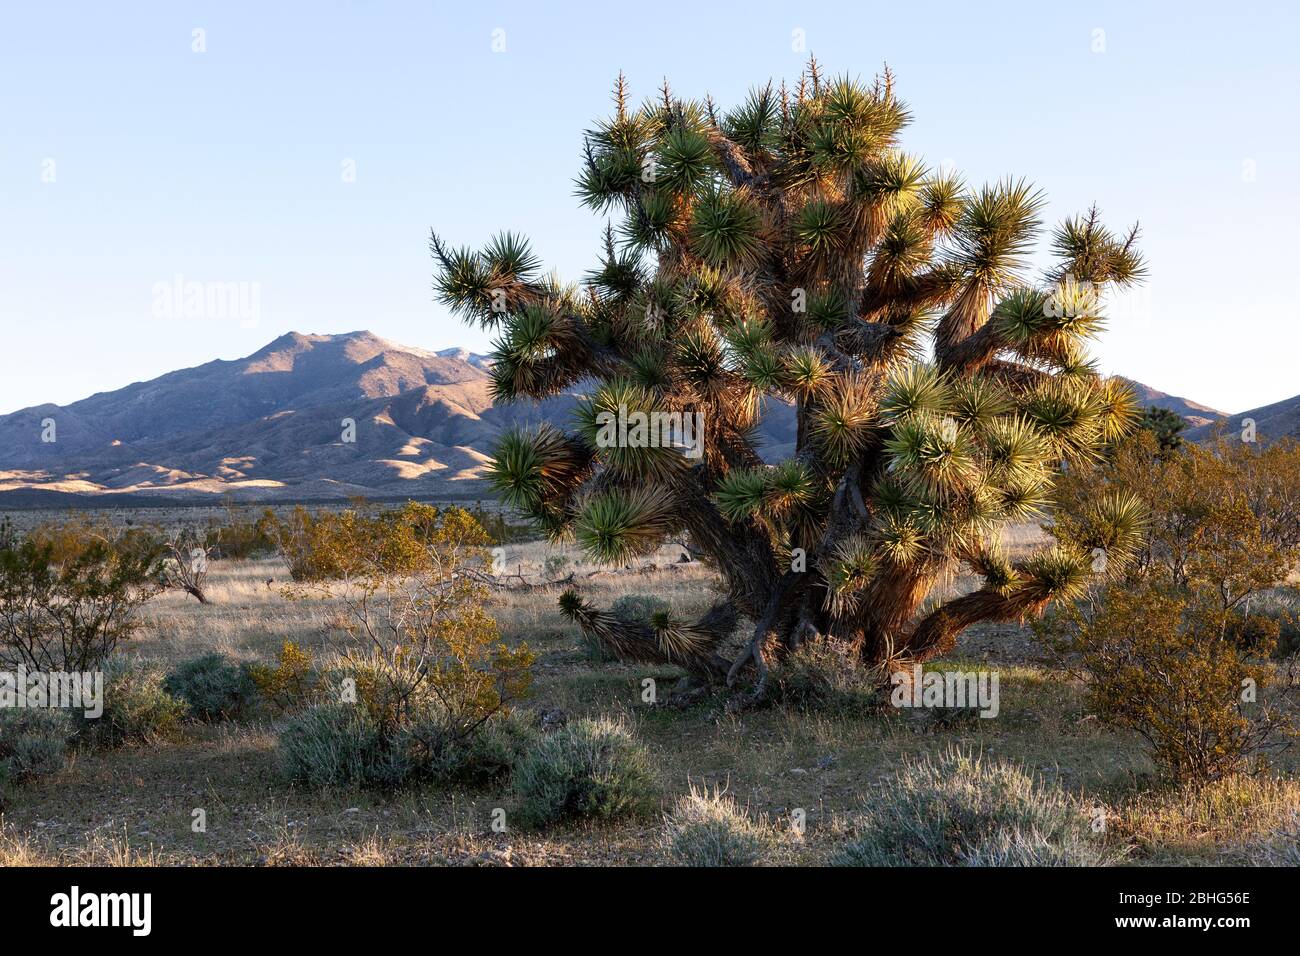 UT00571-00...UTAH -Joshua tree in Beaver Dam Wash a National Conservation Area and scenic backway in the Mojave Desert. Stock Photo